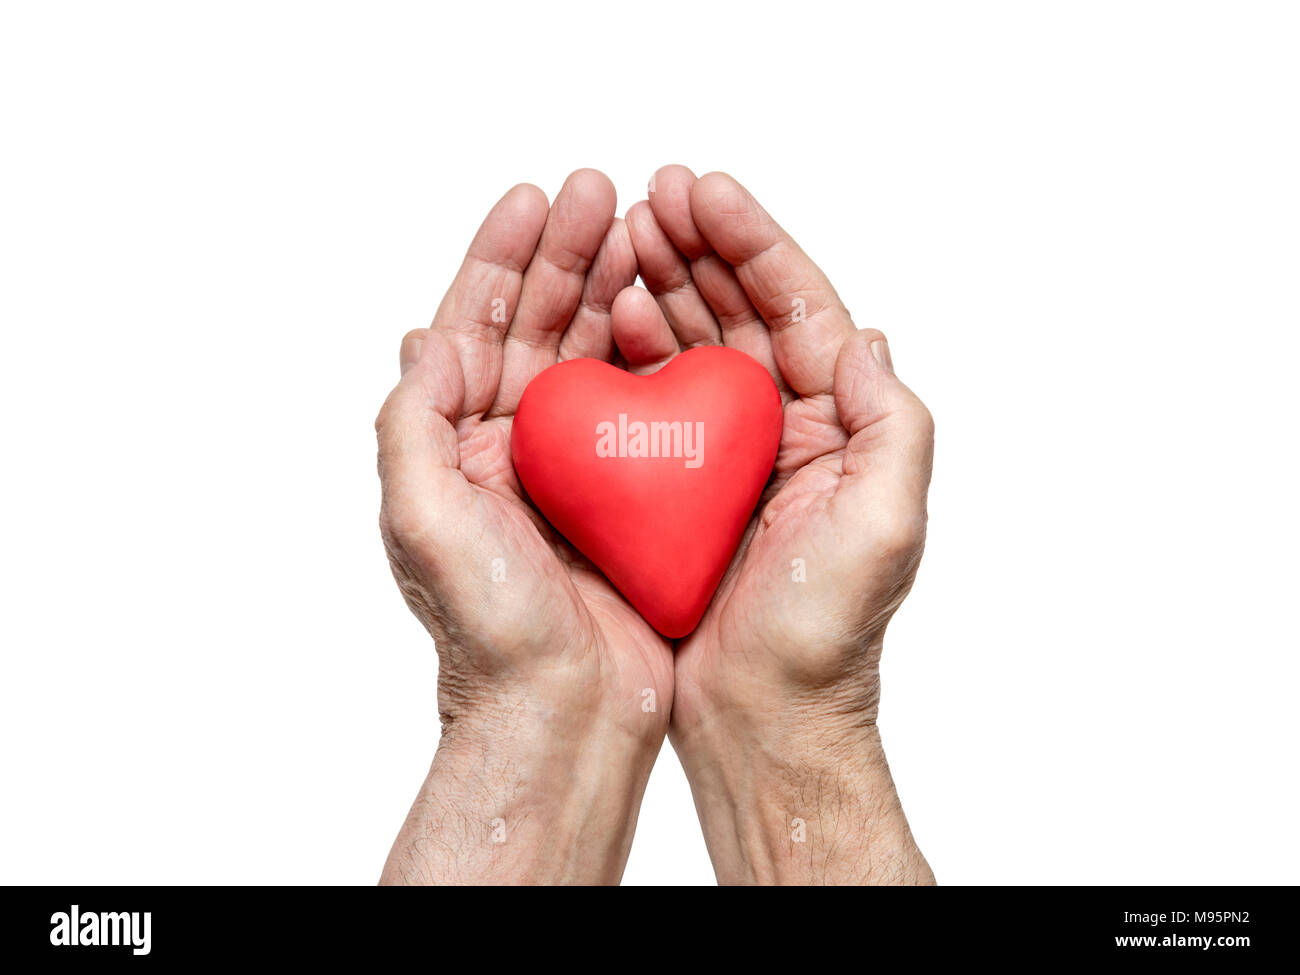 Old man's hands with red heart. Clipping path included. Stock Photo